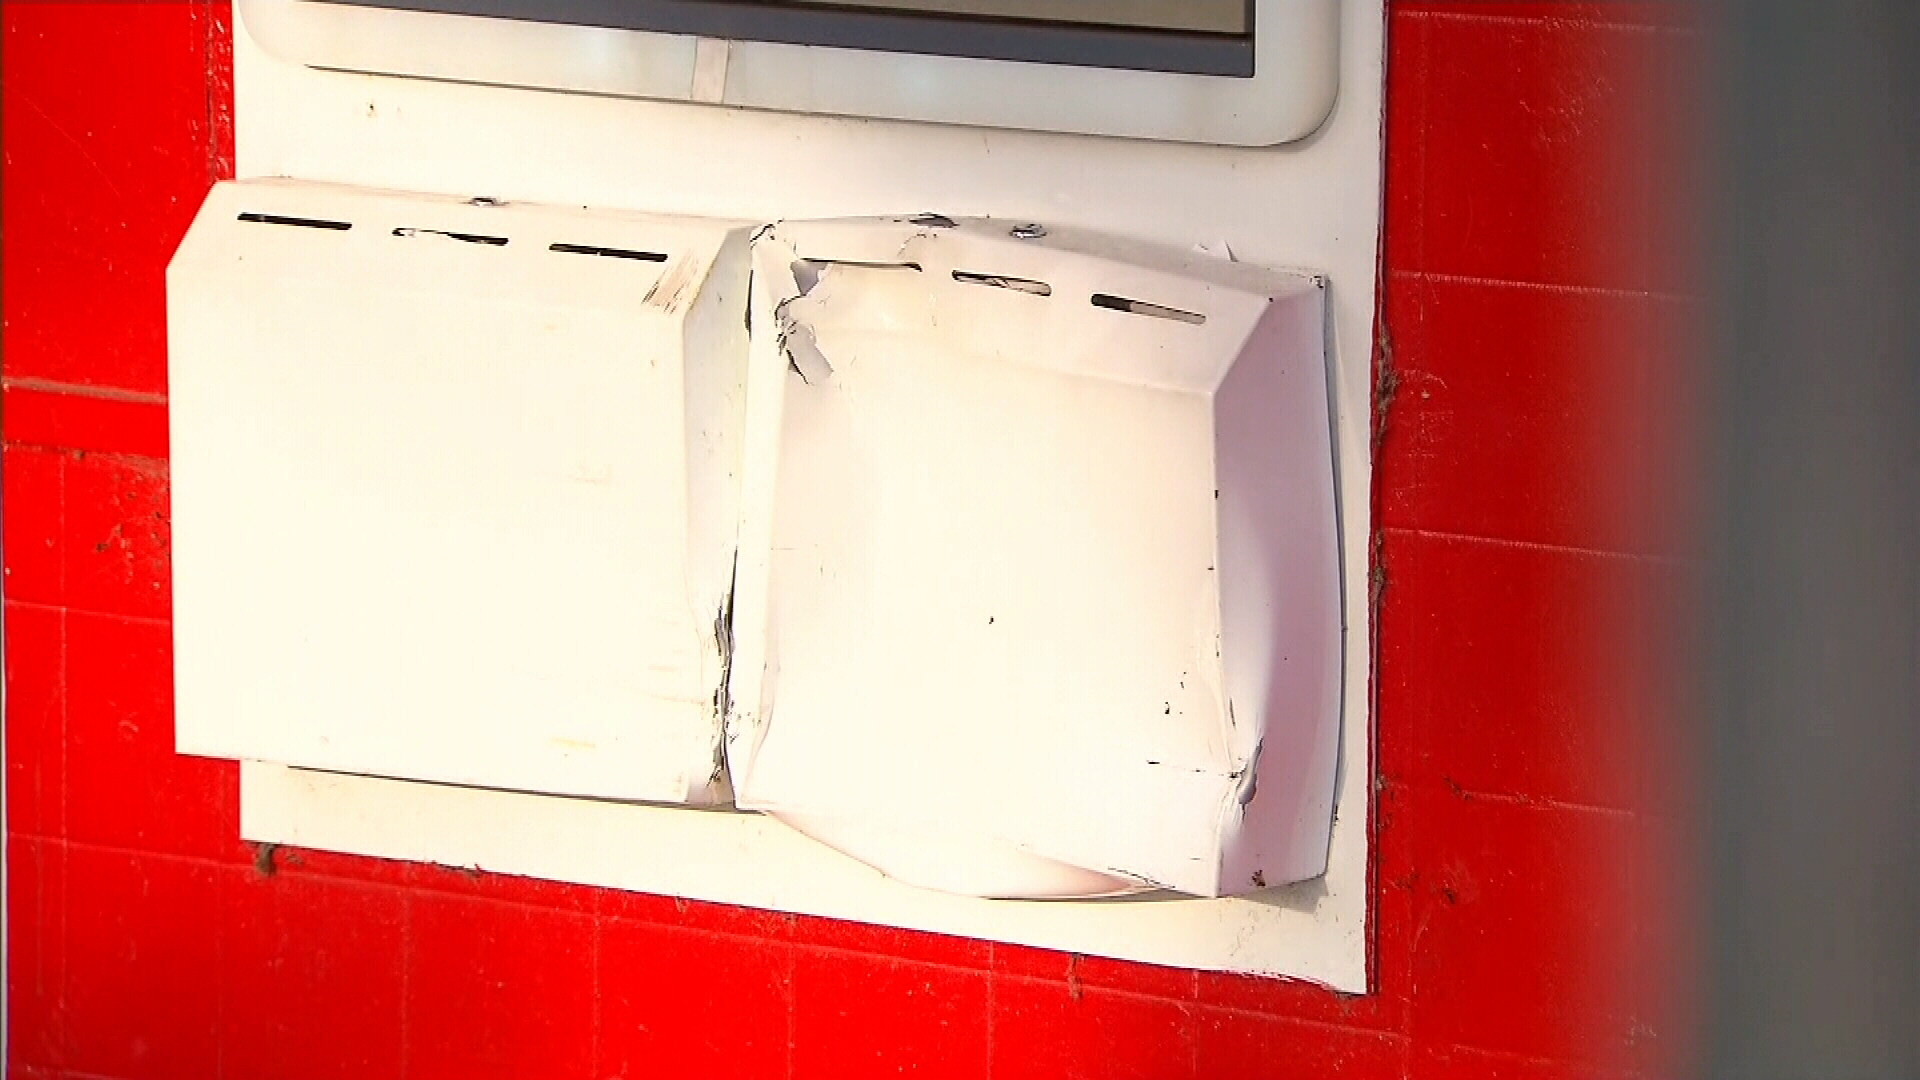 A man was pinned to an ATM by an alleged drunk driver.